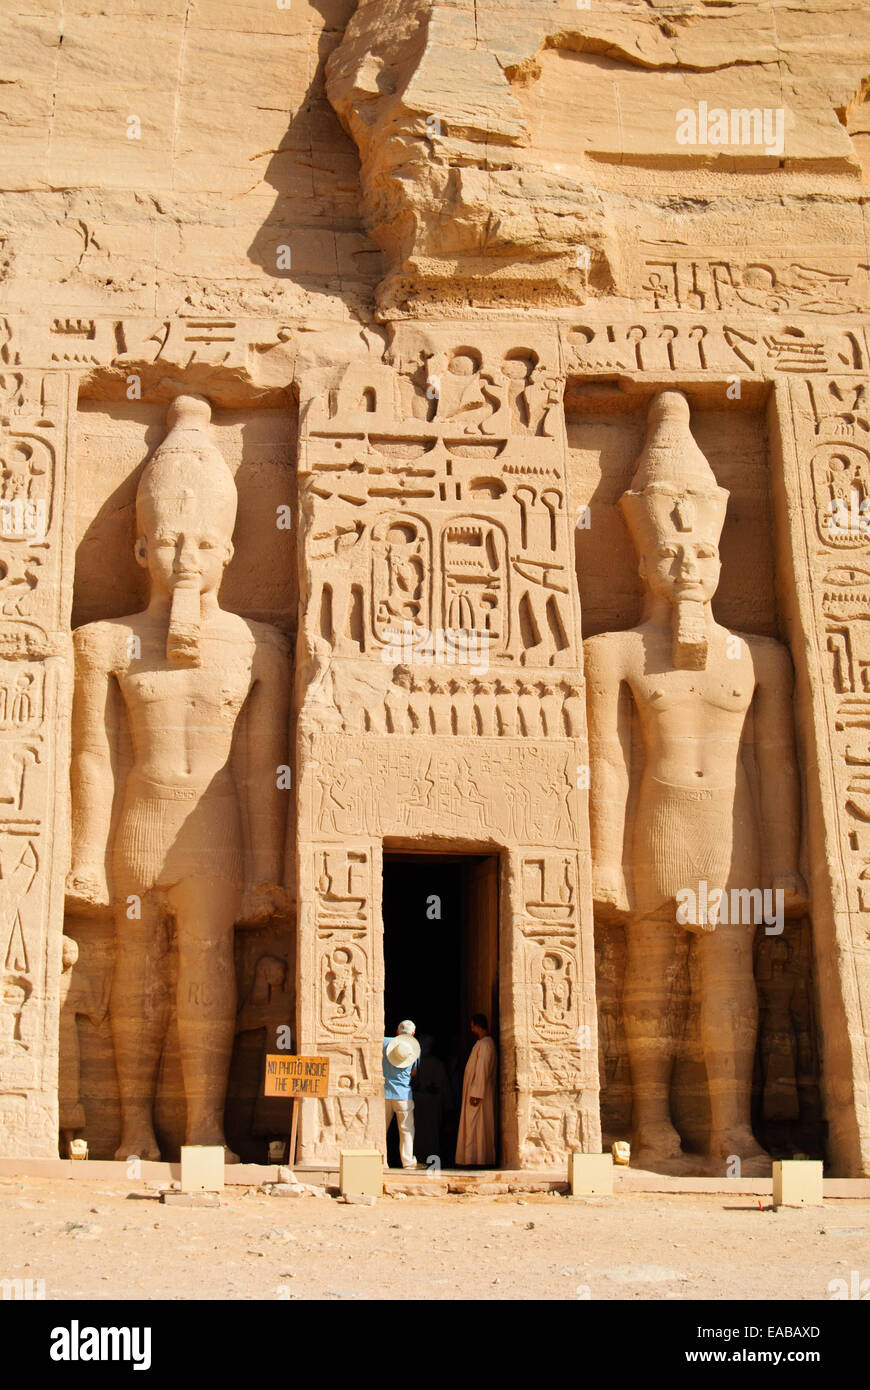 The colossal statues in front of the Abu Simbel temple. Stock Photo